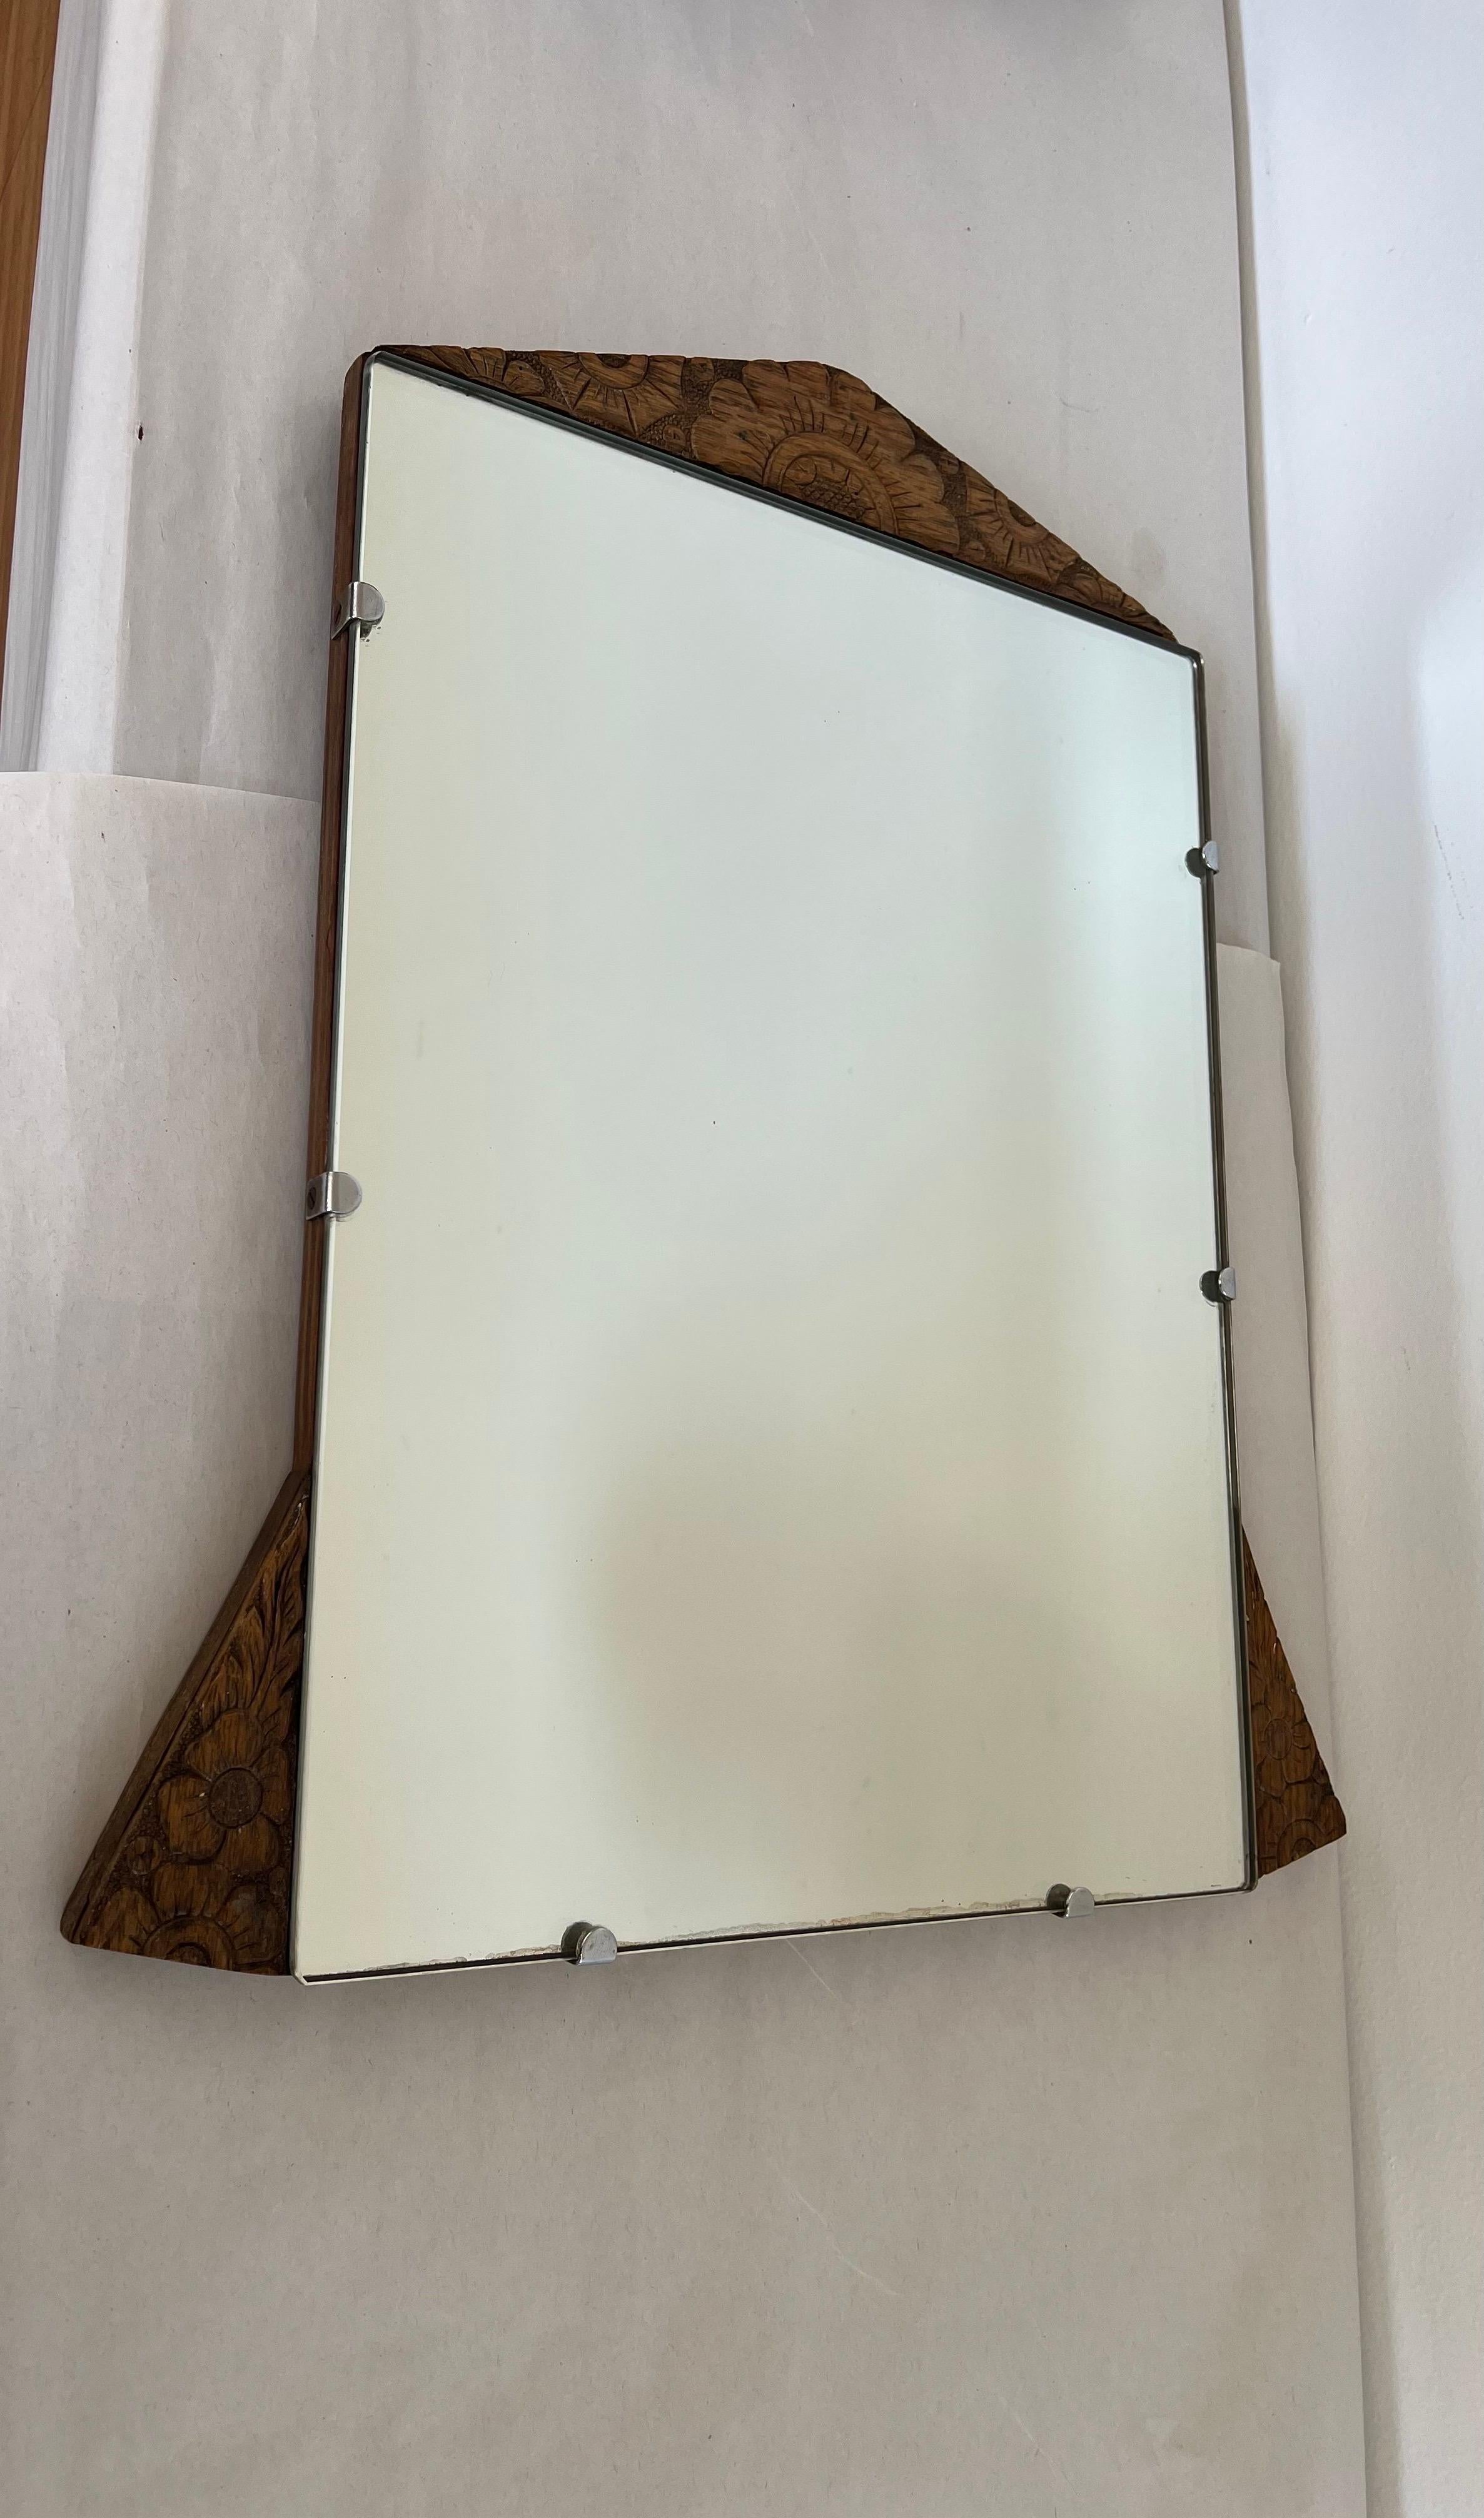 Vintage Mirror Art Deco Style with Floral Carvings Possible Circa 1950s - 1970s Interesting Patina Wood and Hardware

Dimensions. 15 1/2 W ; 18 H ; 3/4 D.